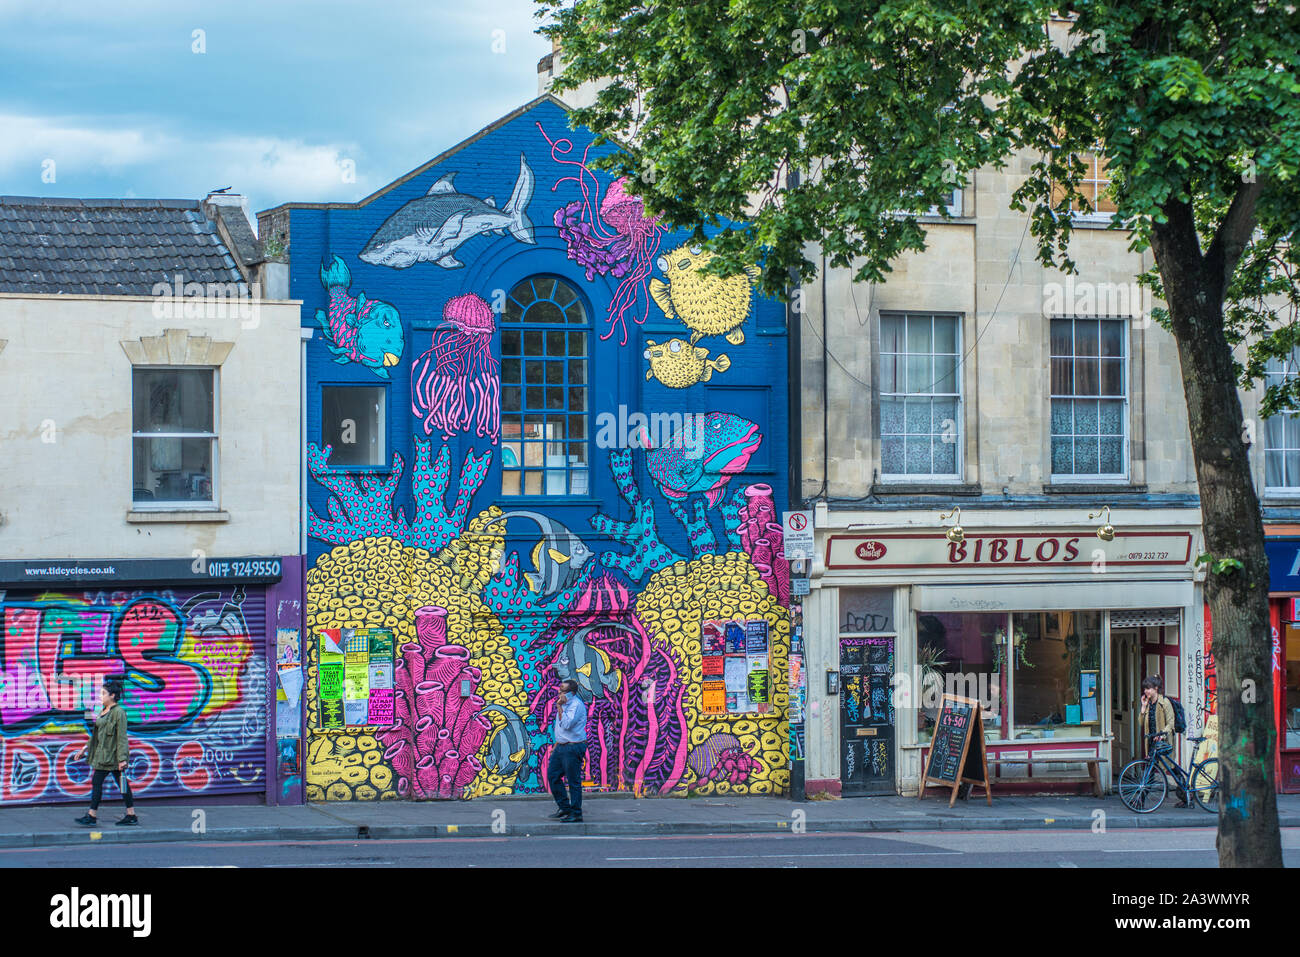 Stokes Croft is a colourful district of Bristol full of street art. Avon. England. UK. Stock Photo